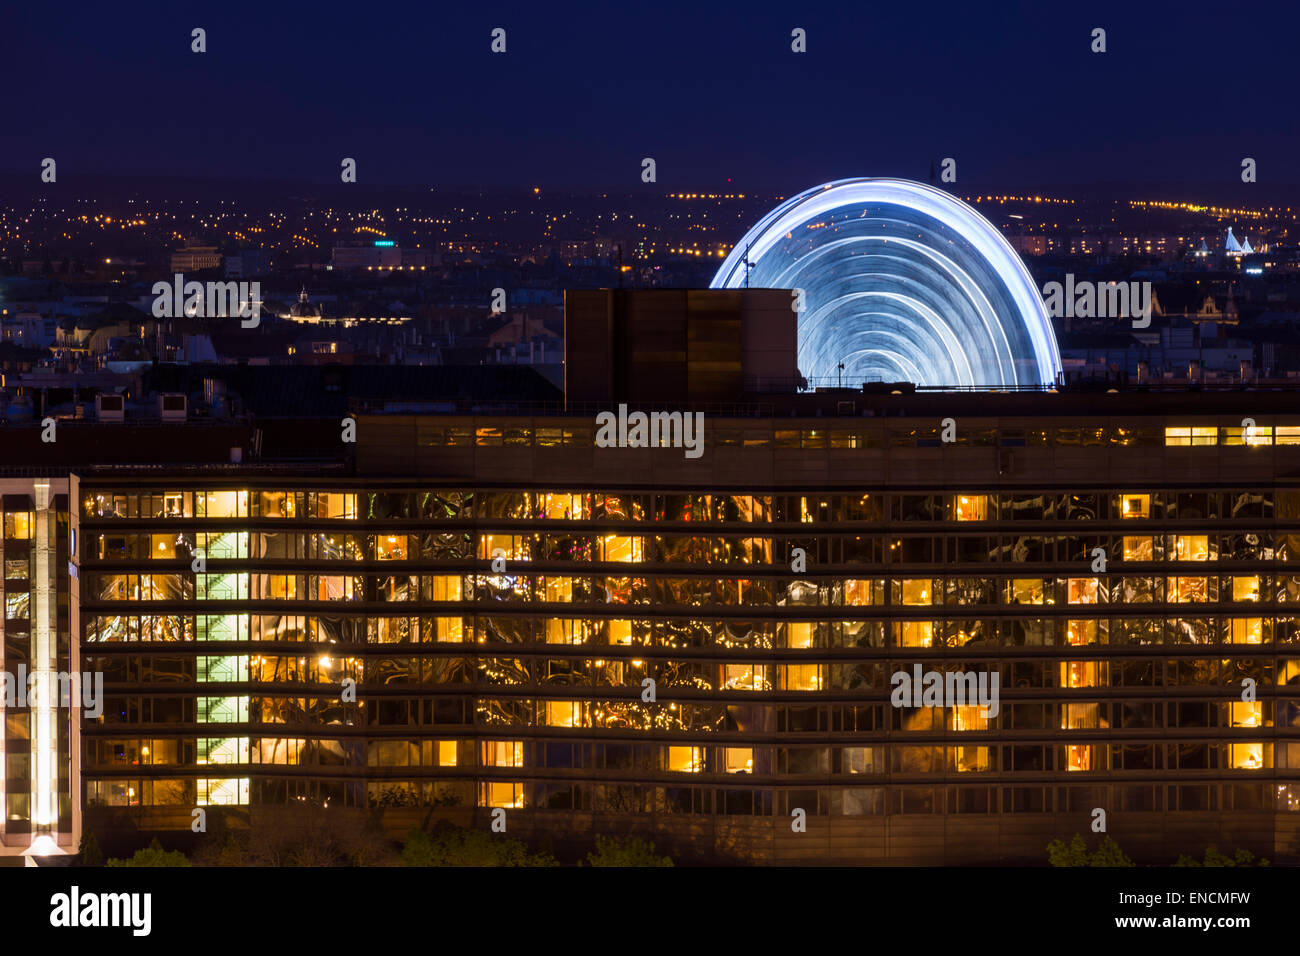 Motion blur of the Sziget Eye in Budapest caused by a long exposure. In front is the Intercontinental Hotel. Stock Photo